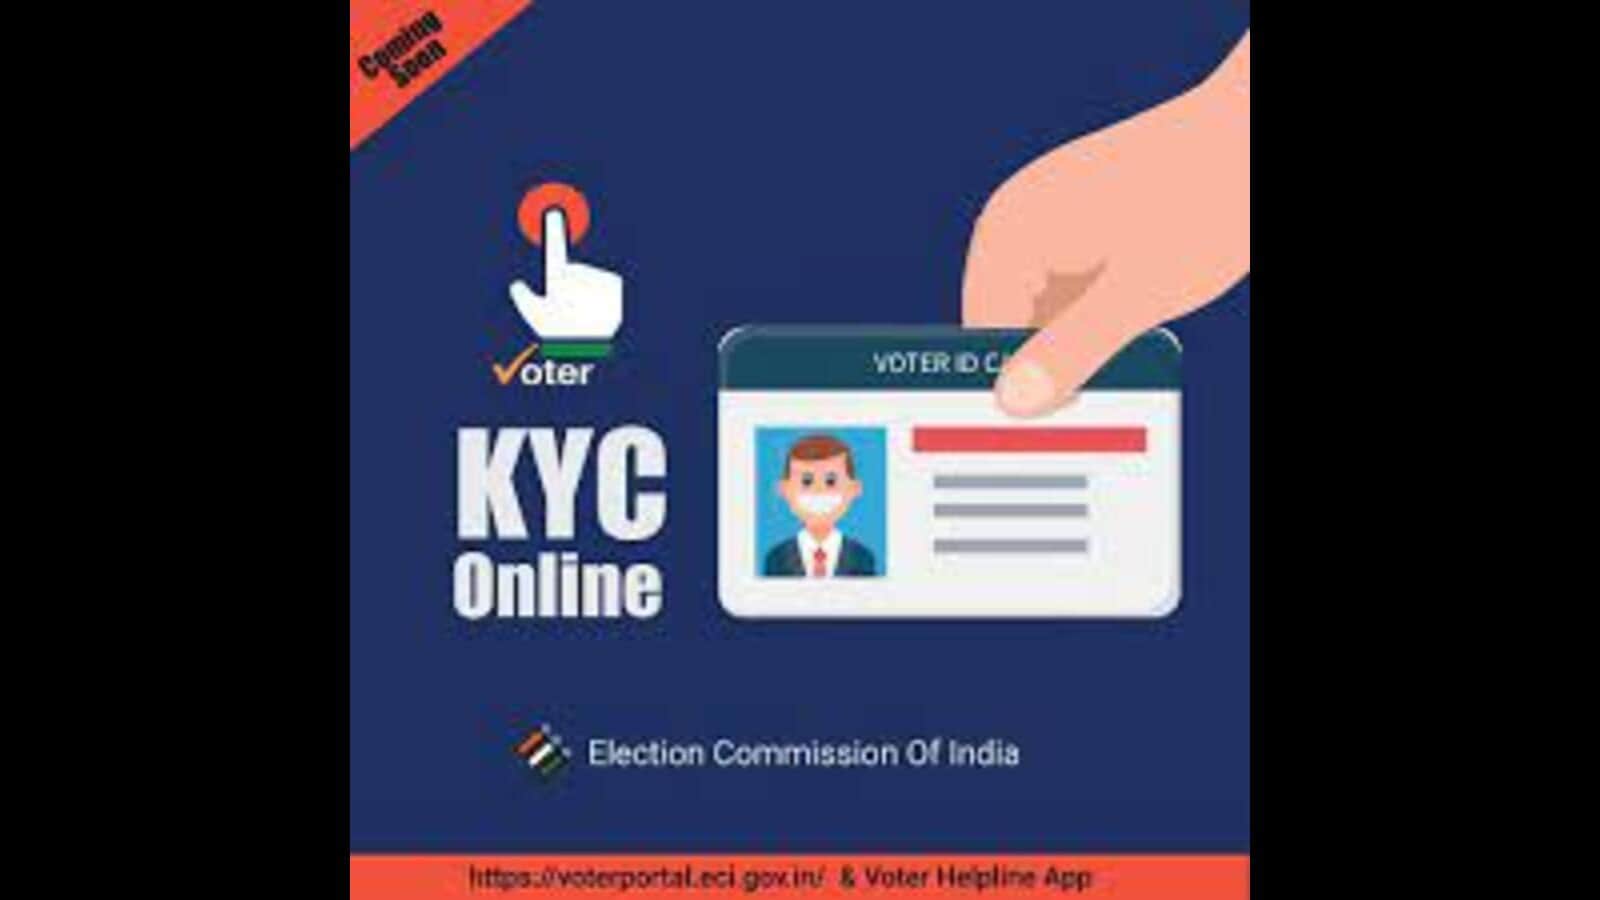 Lucknow: Officials asked to make wide publicity of KYC App to help people choose a right candidate